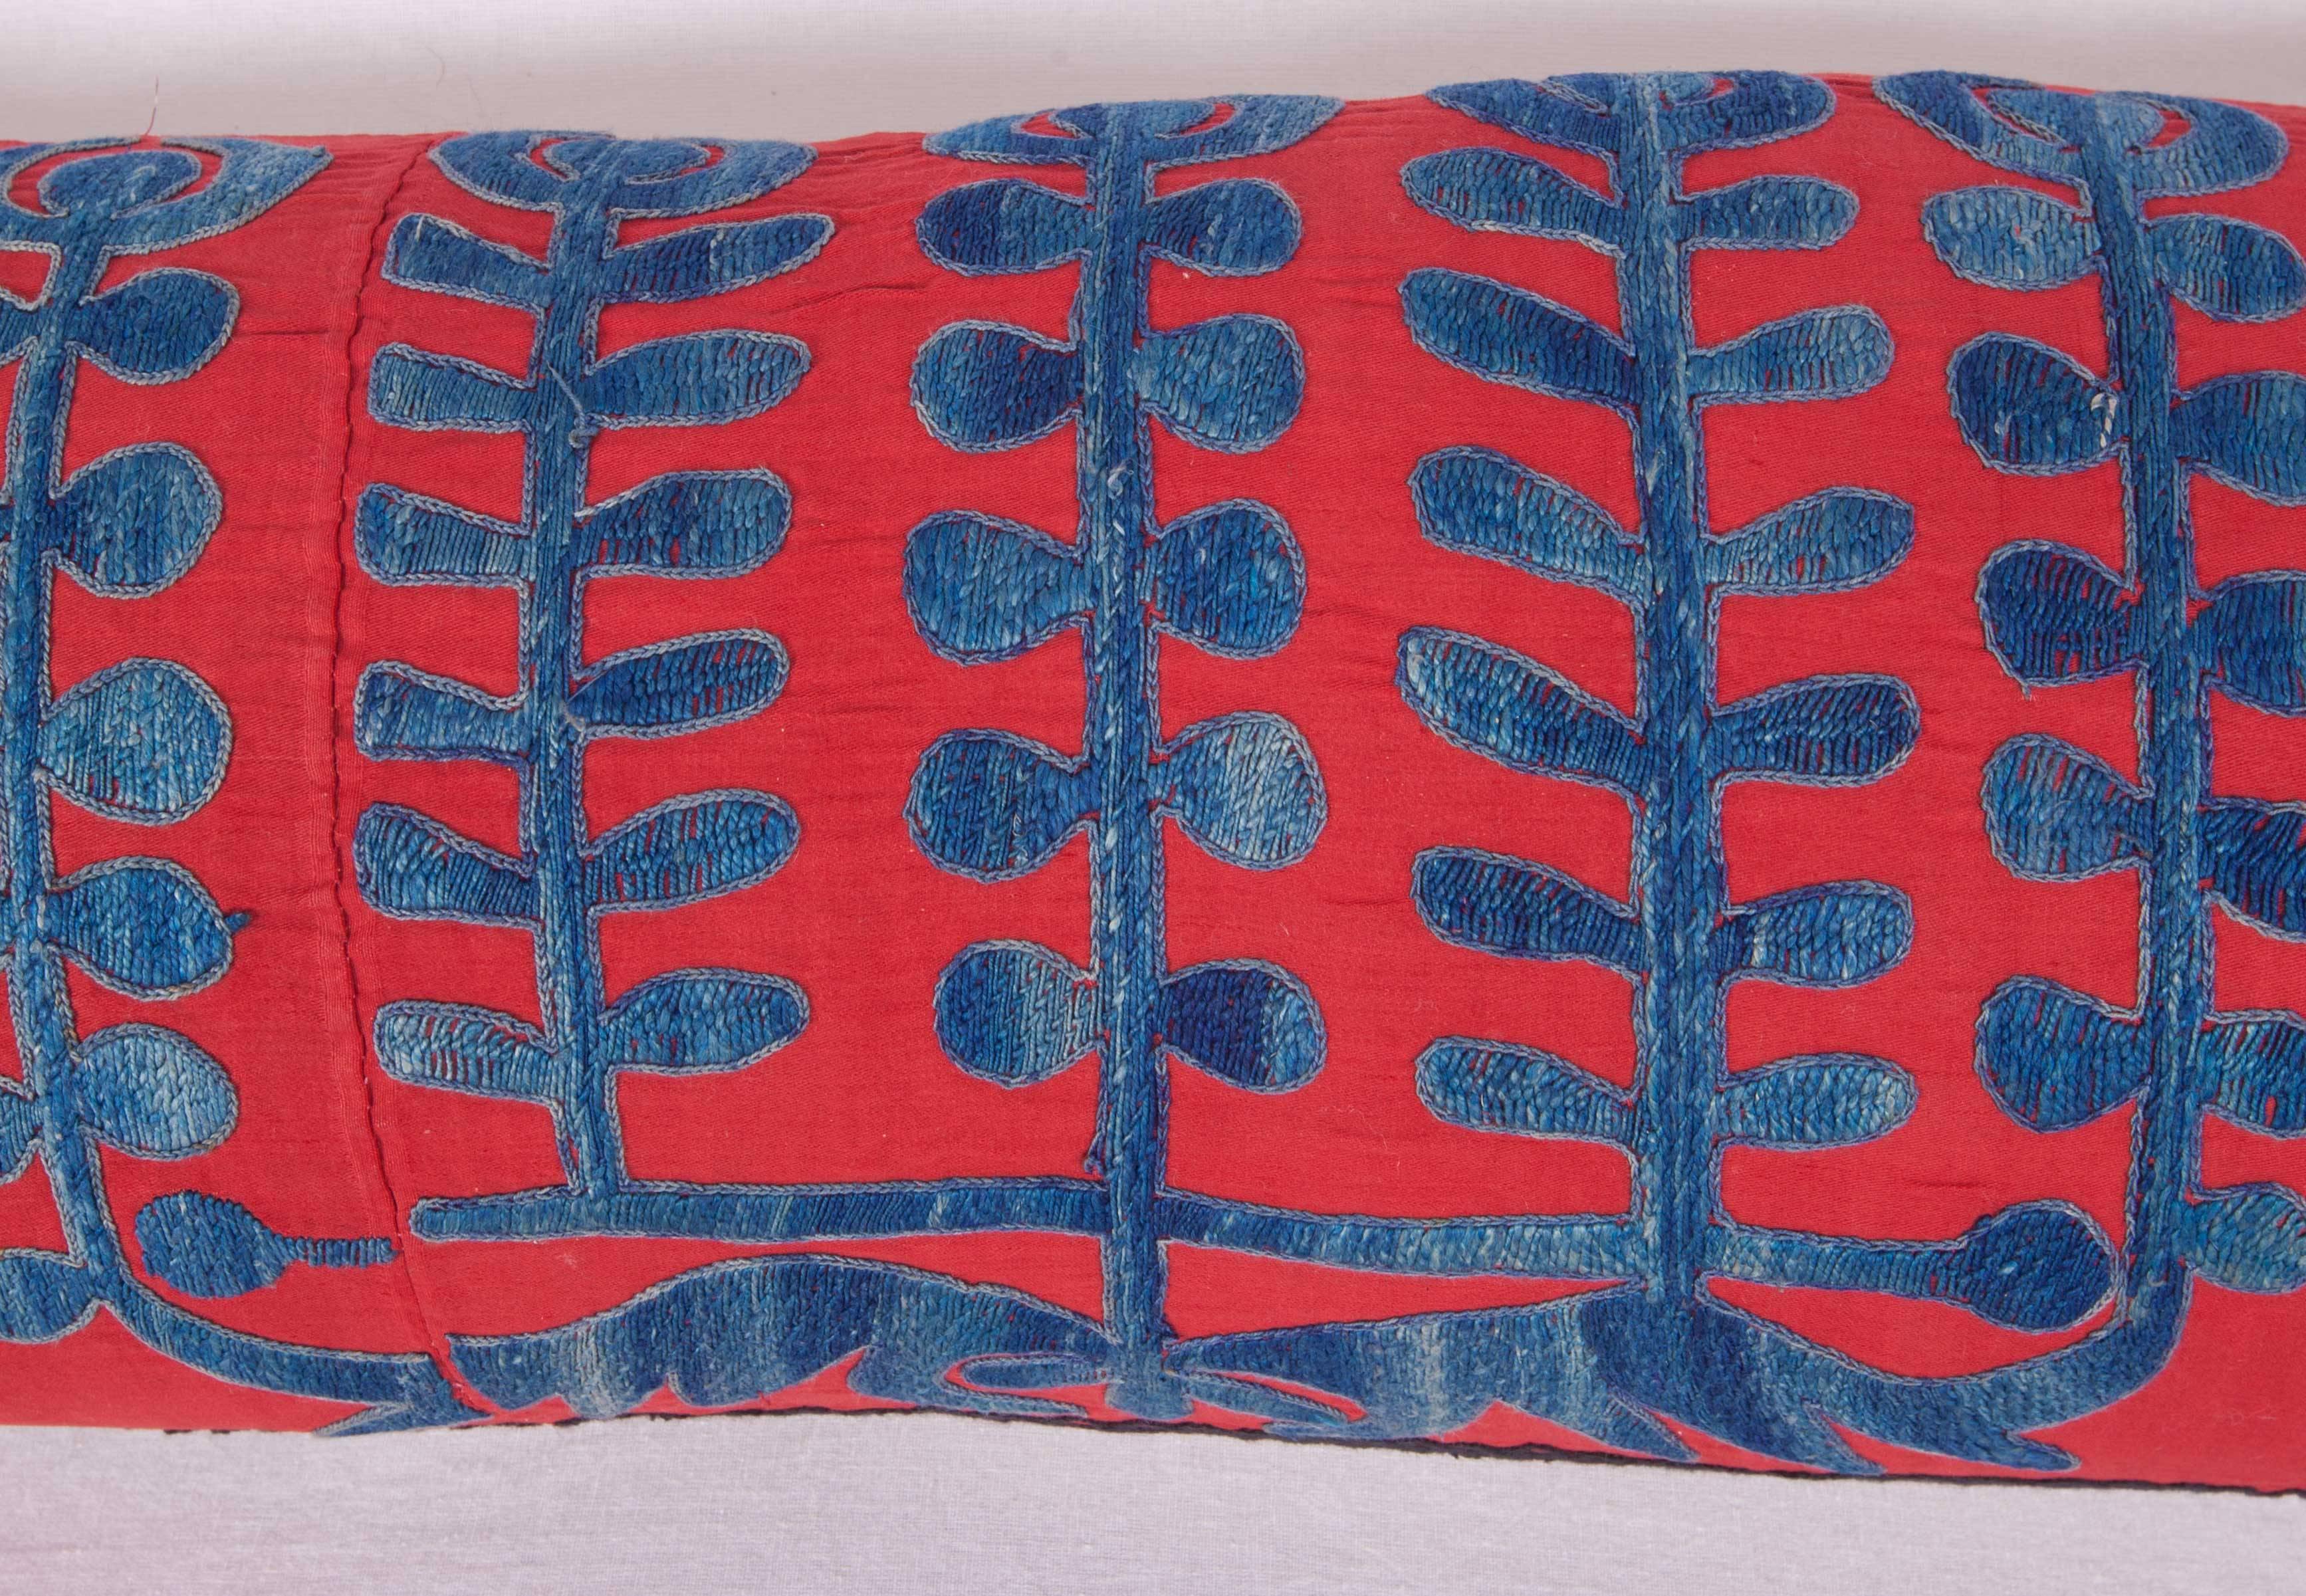 The pillow is made out of a mid-20th century, Uzbek Samarkand silk Suzani fragment. It does not come with an insert but it comes with a bag made to the size and out of cotton to accommodate the filling. The backing is made of linen. Please note